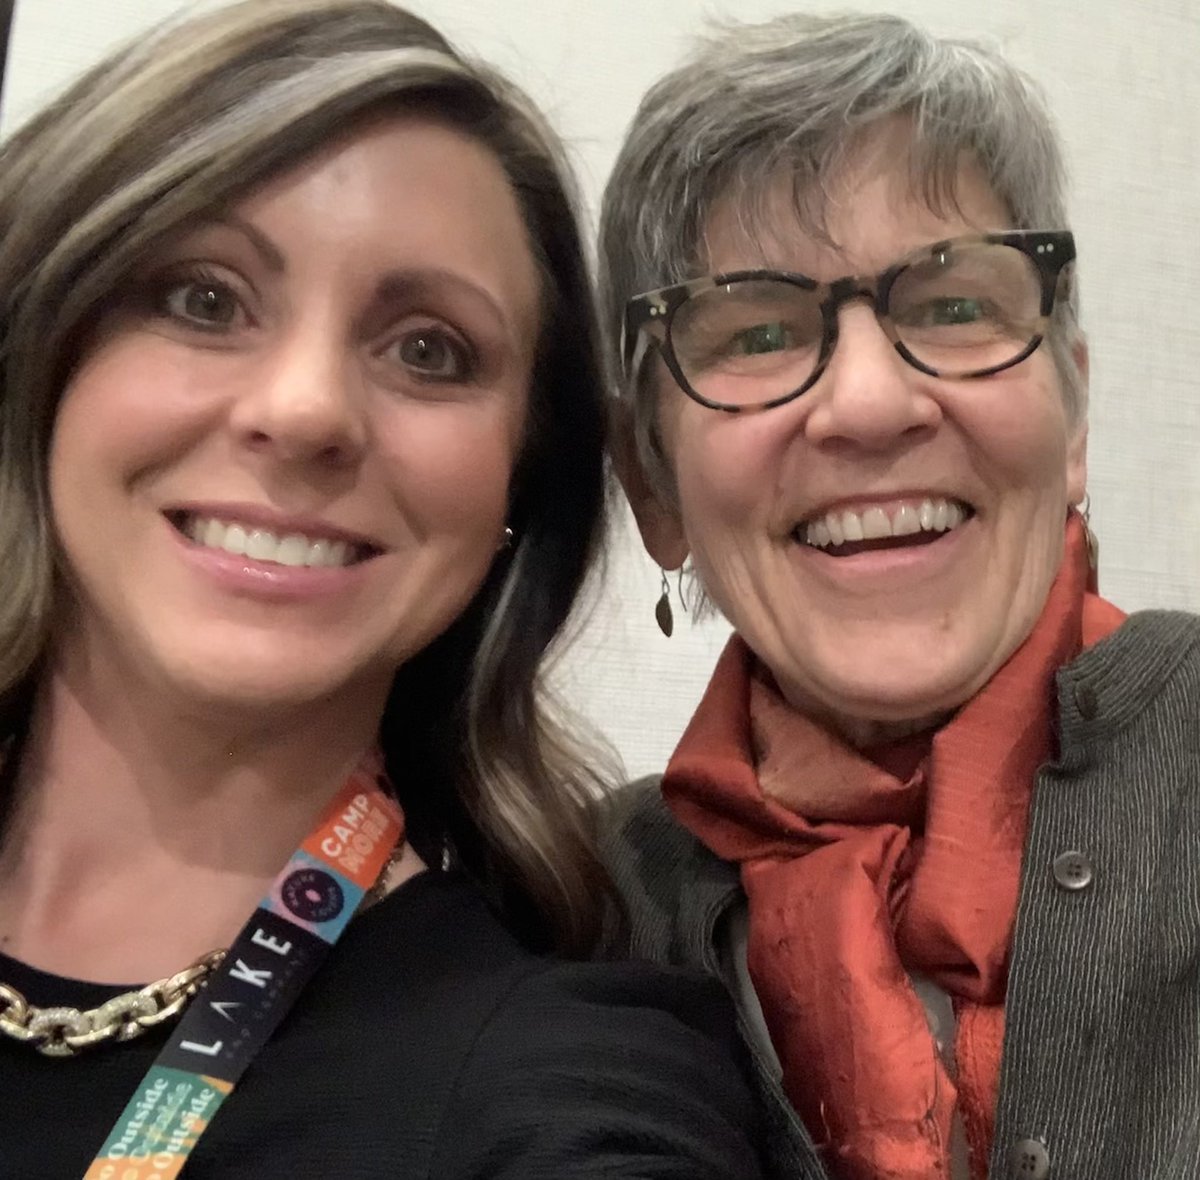 Fan girl right here with a true MN Explorer Ann Bancroft!!!🤩#EMTConf2023 #OnlyinMN #TourismMatters